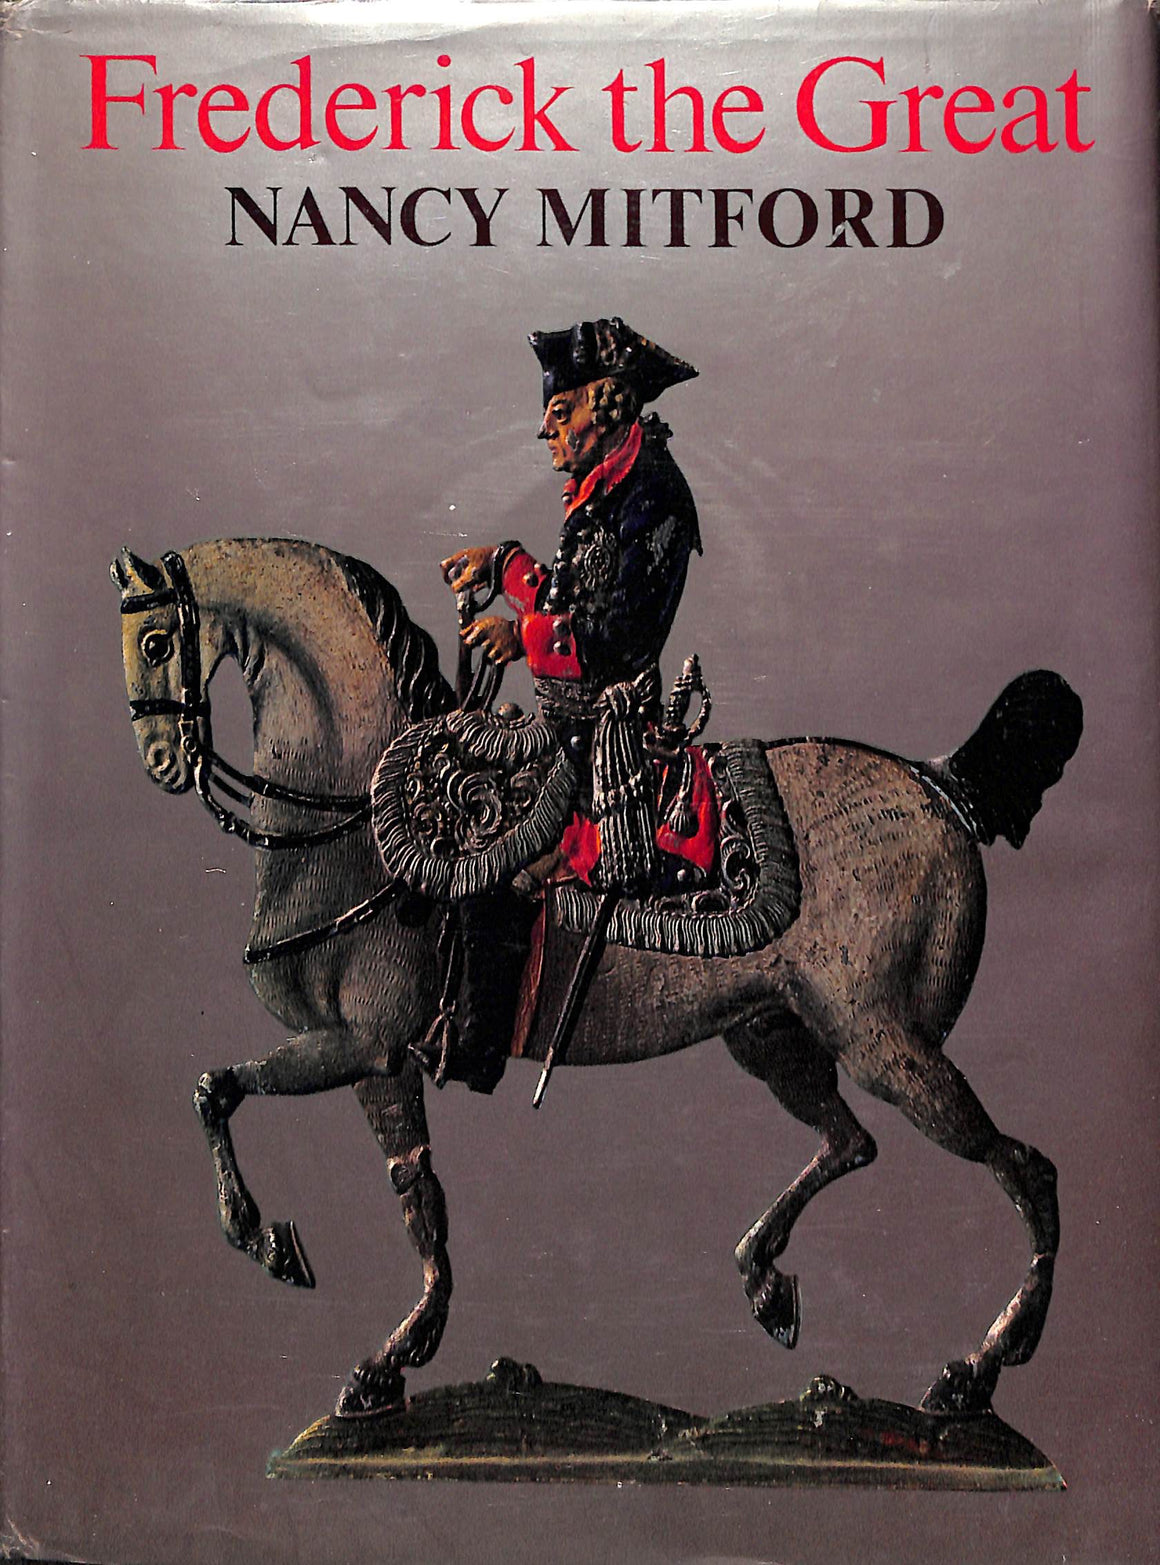 'Frederick the Great' 1970 by Nancy Mitford